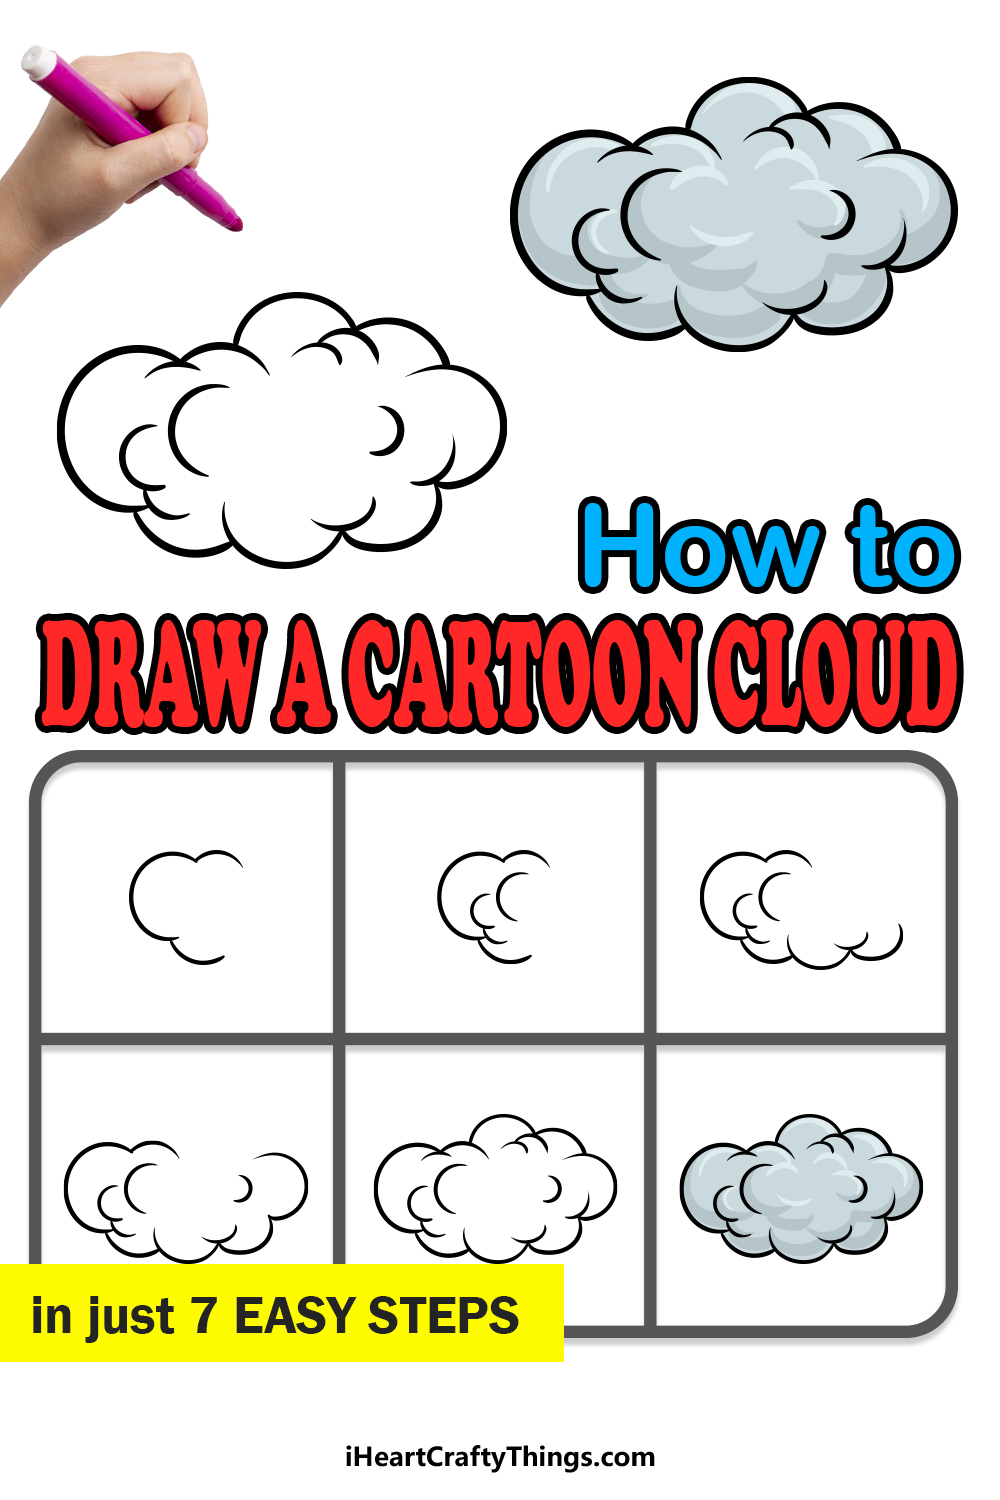 How to Draw A Cartoon cloud in 7 easy steps